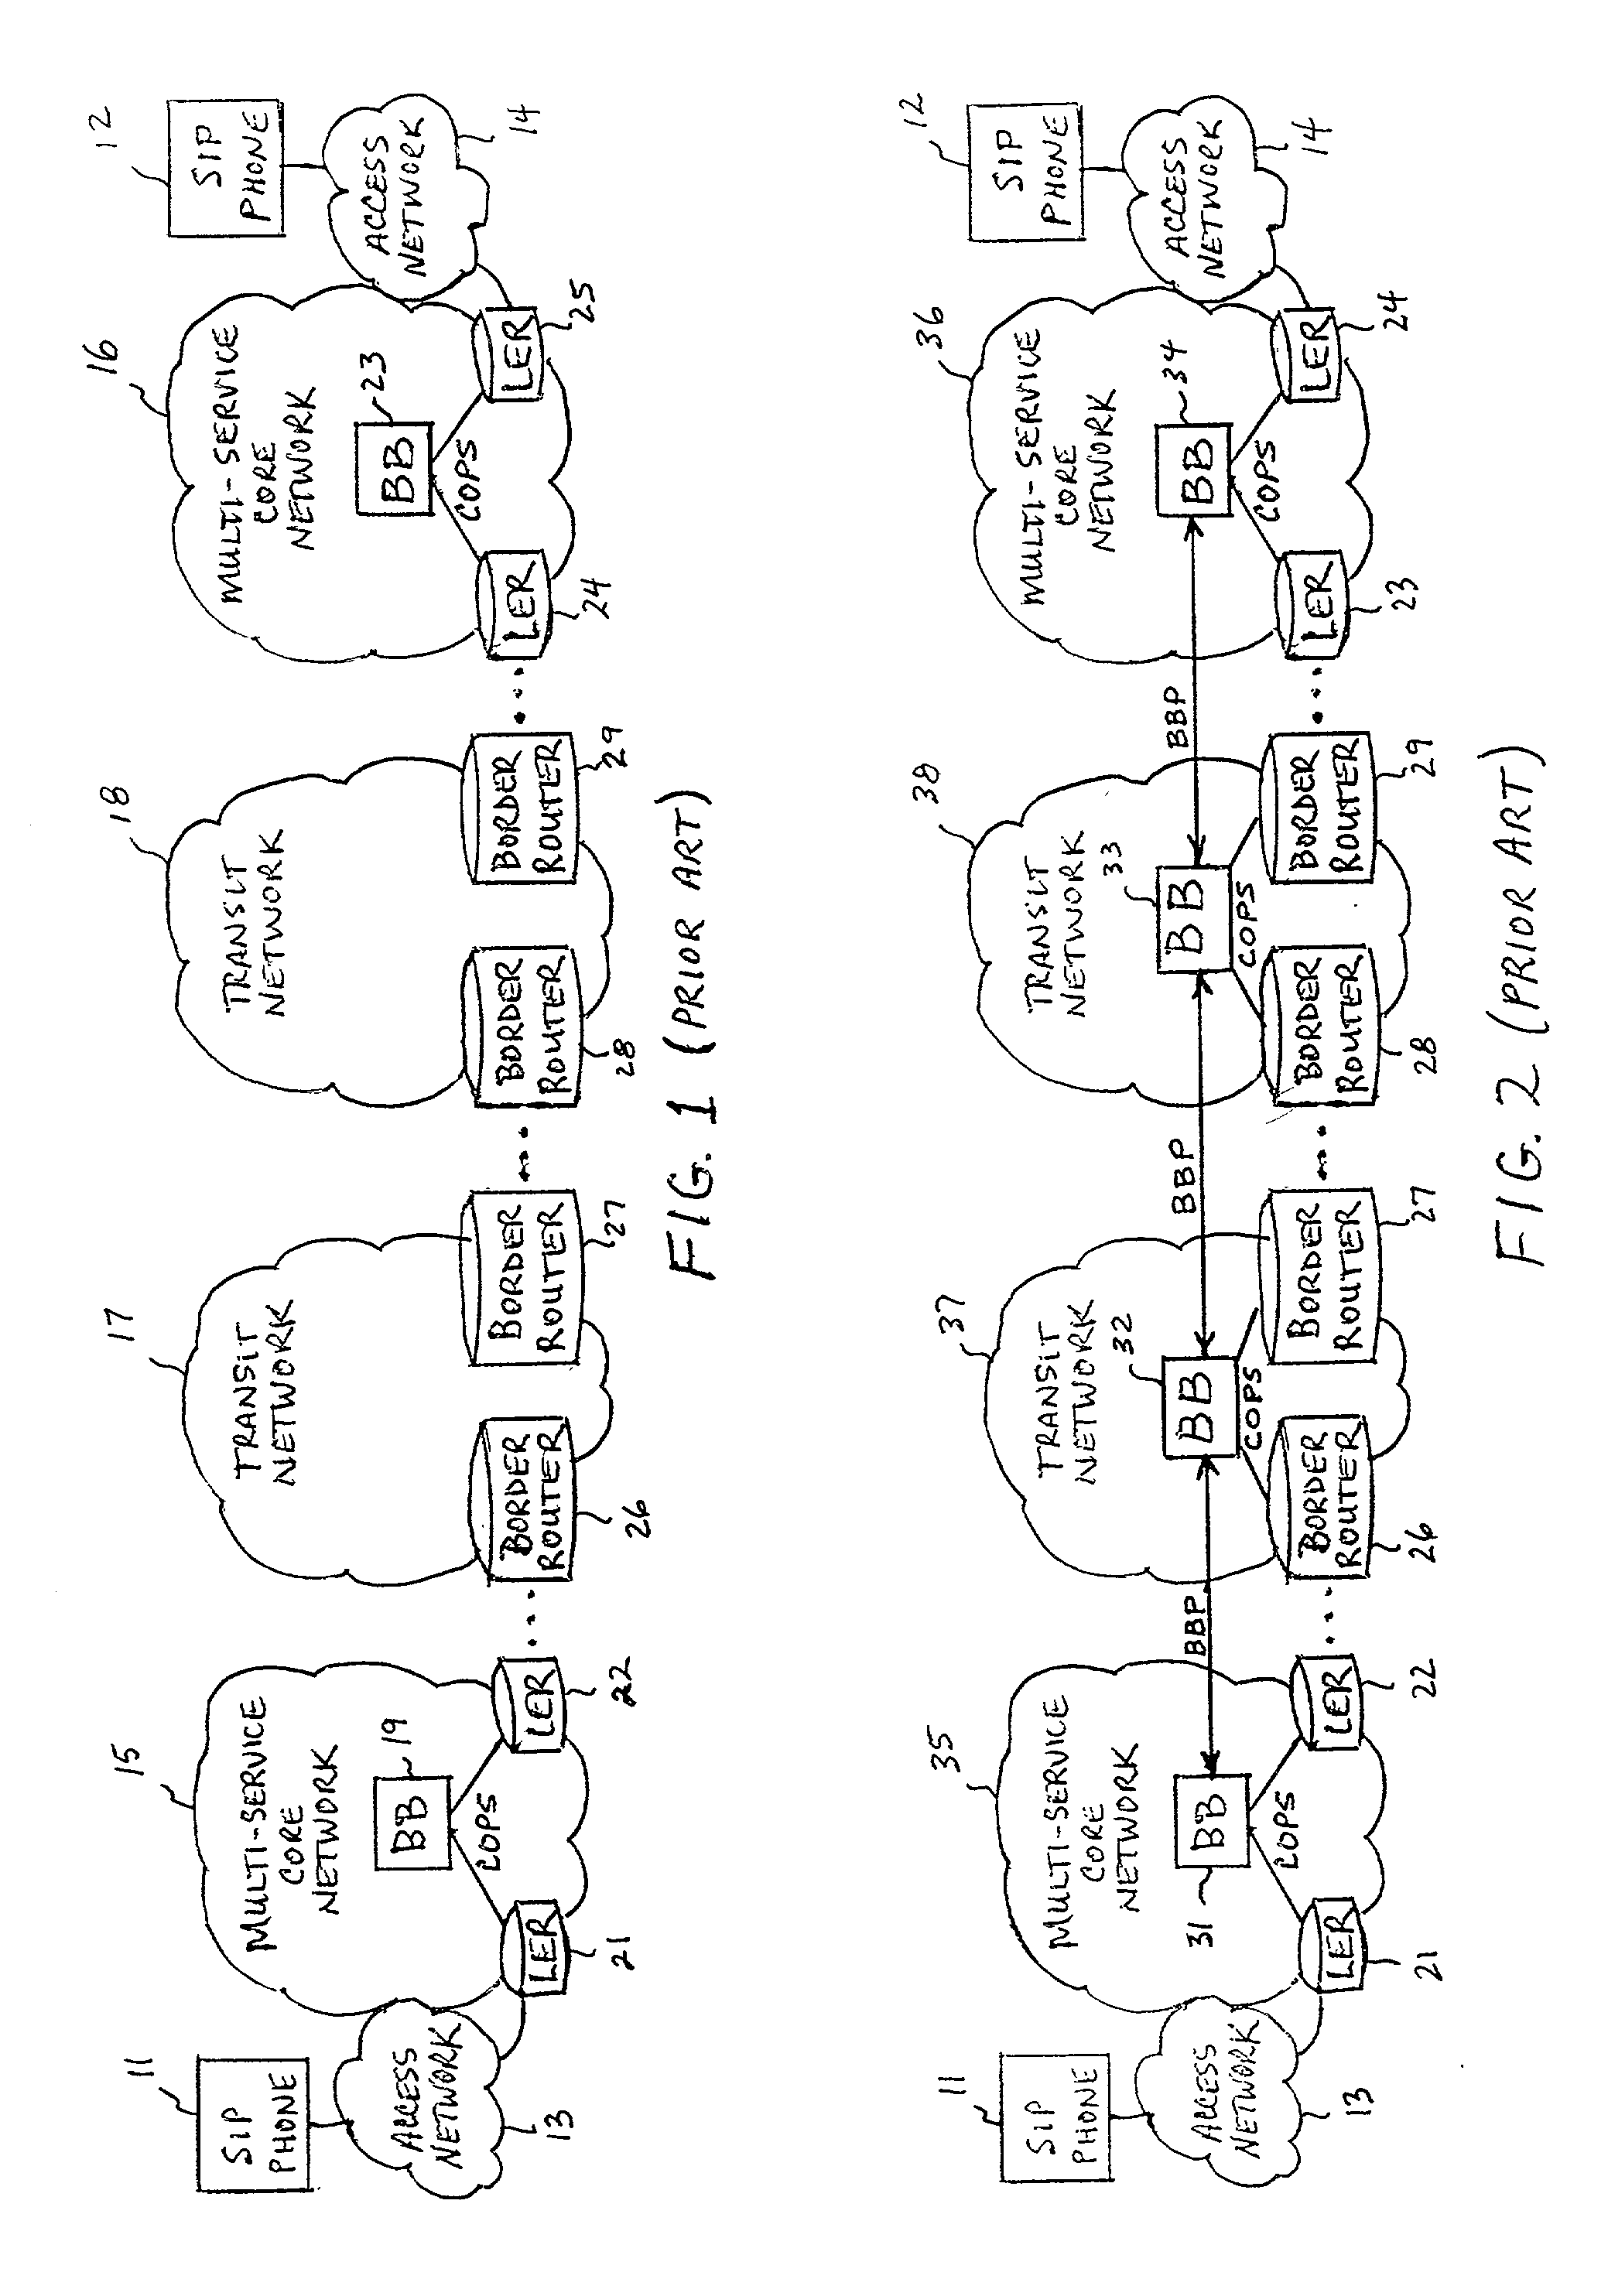 System and method for providing end-to-end quality of service (QoS) across multiple internet protocol (IP) networks